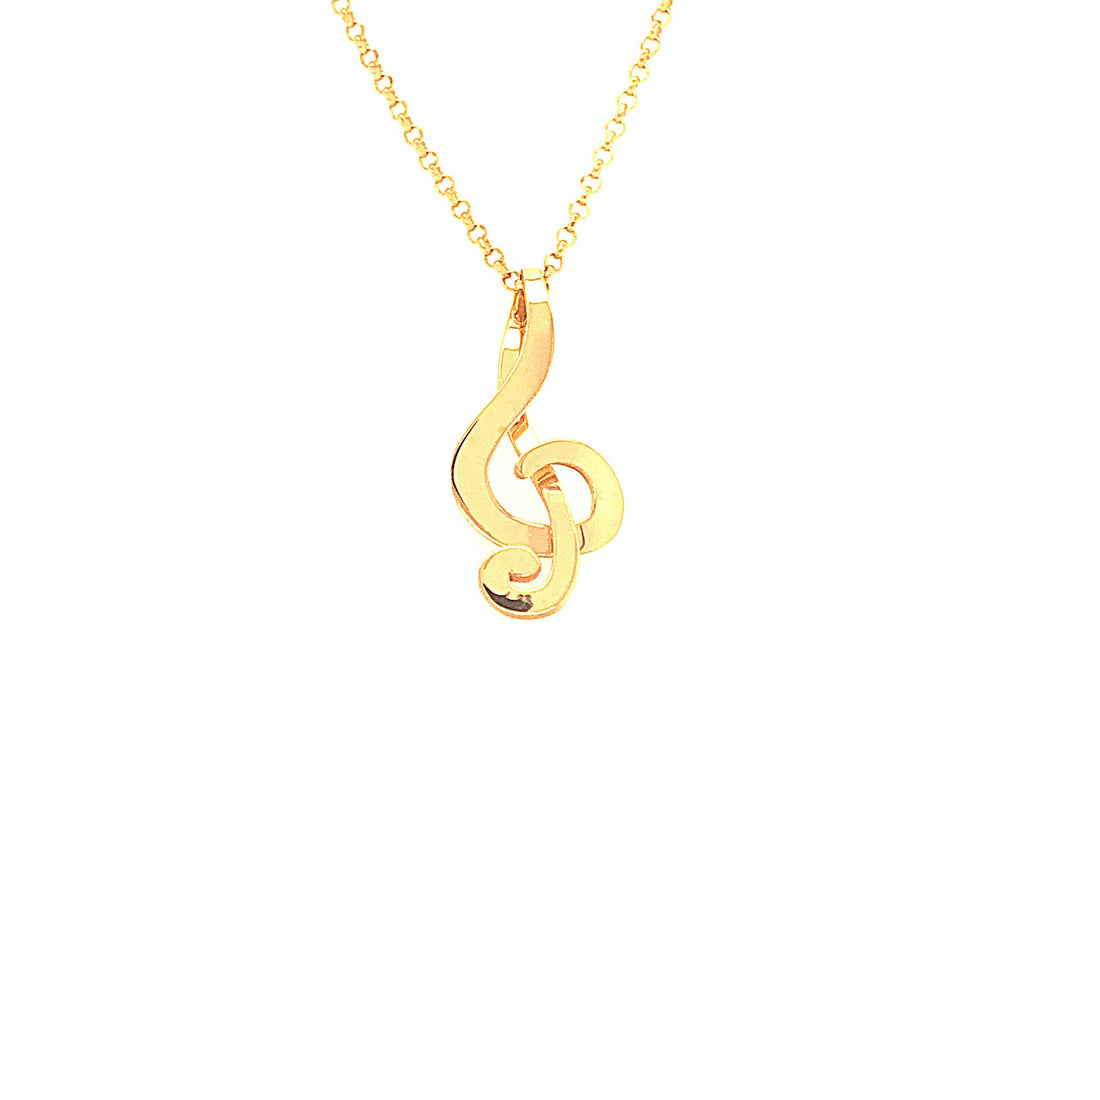 Chavi G piccola necklave goldplated silver with short rolo chain from Scandinavia LoveNotes.